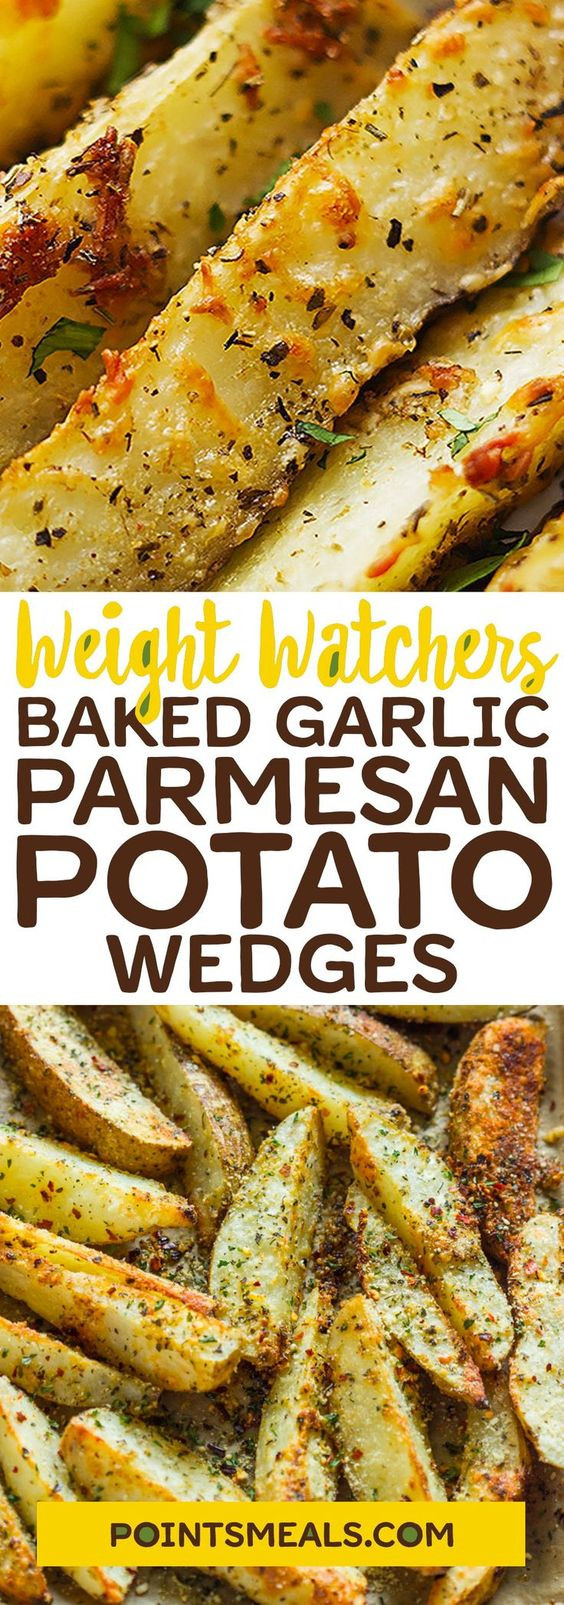 Weight Watchers Dinner Recipes
 50 Weight Watchers Meals with Points Simple Dinner